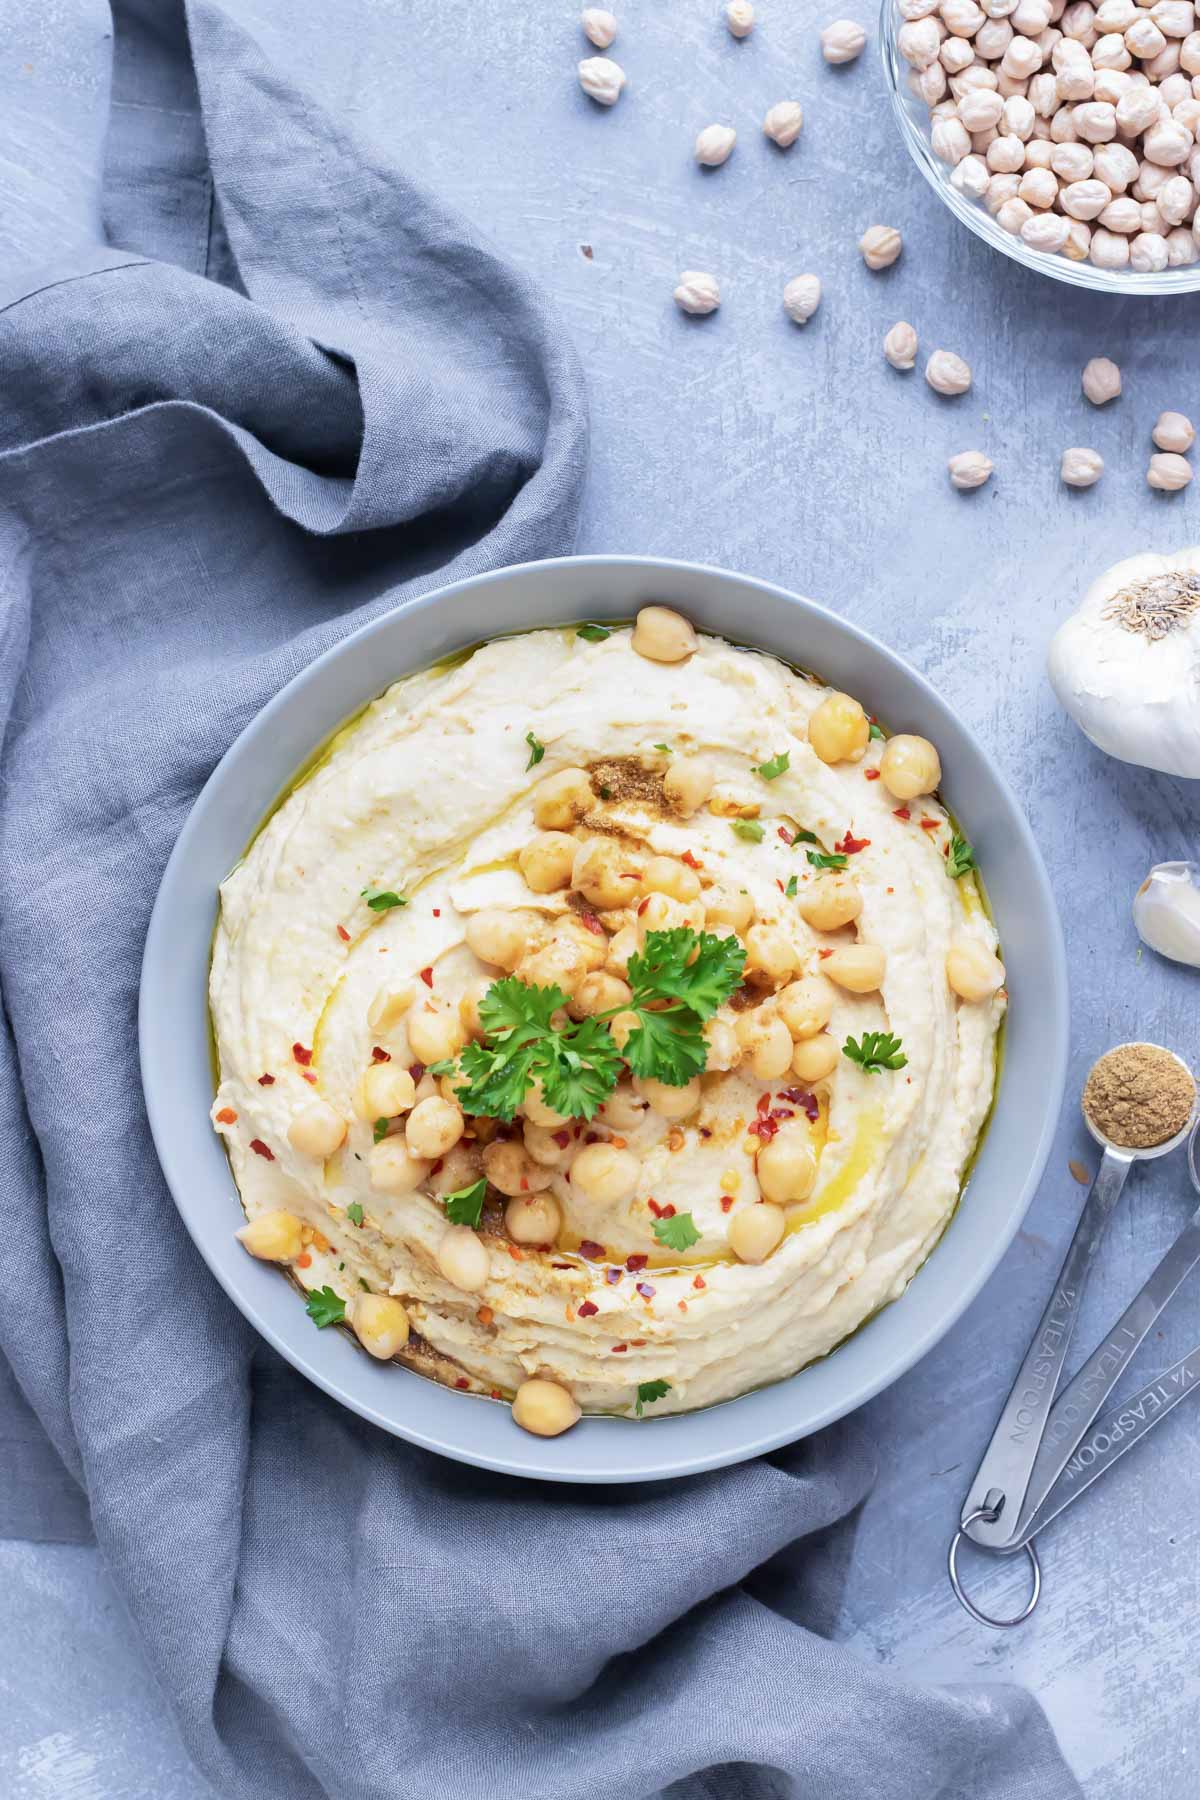 Creamy, healthy, hummus in a silver bowl next to garlic and dried chickpeas.